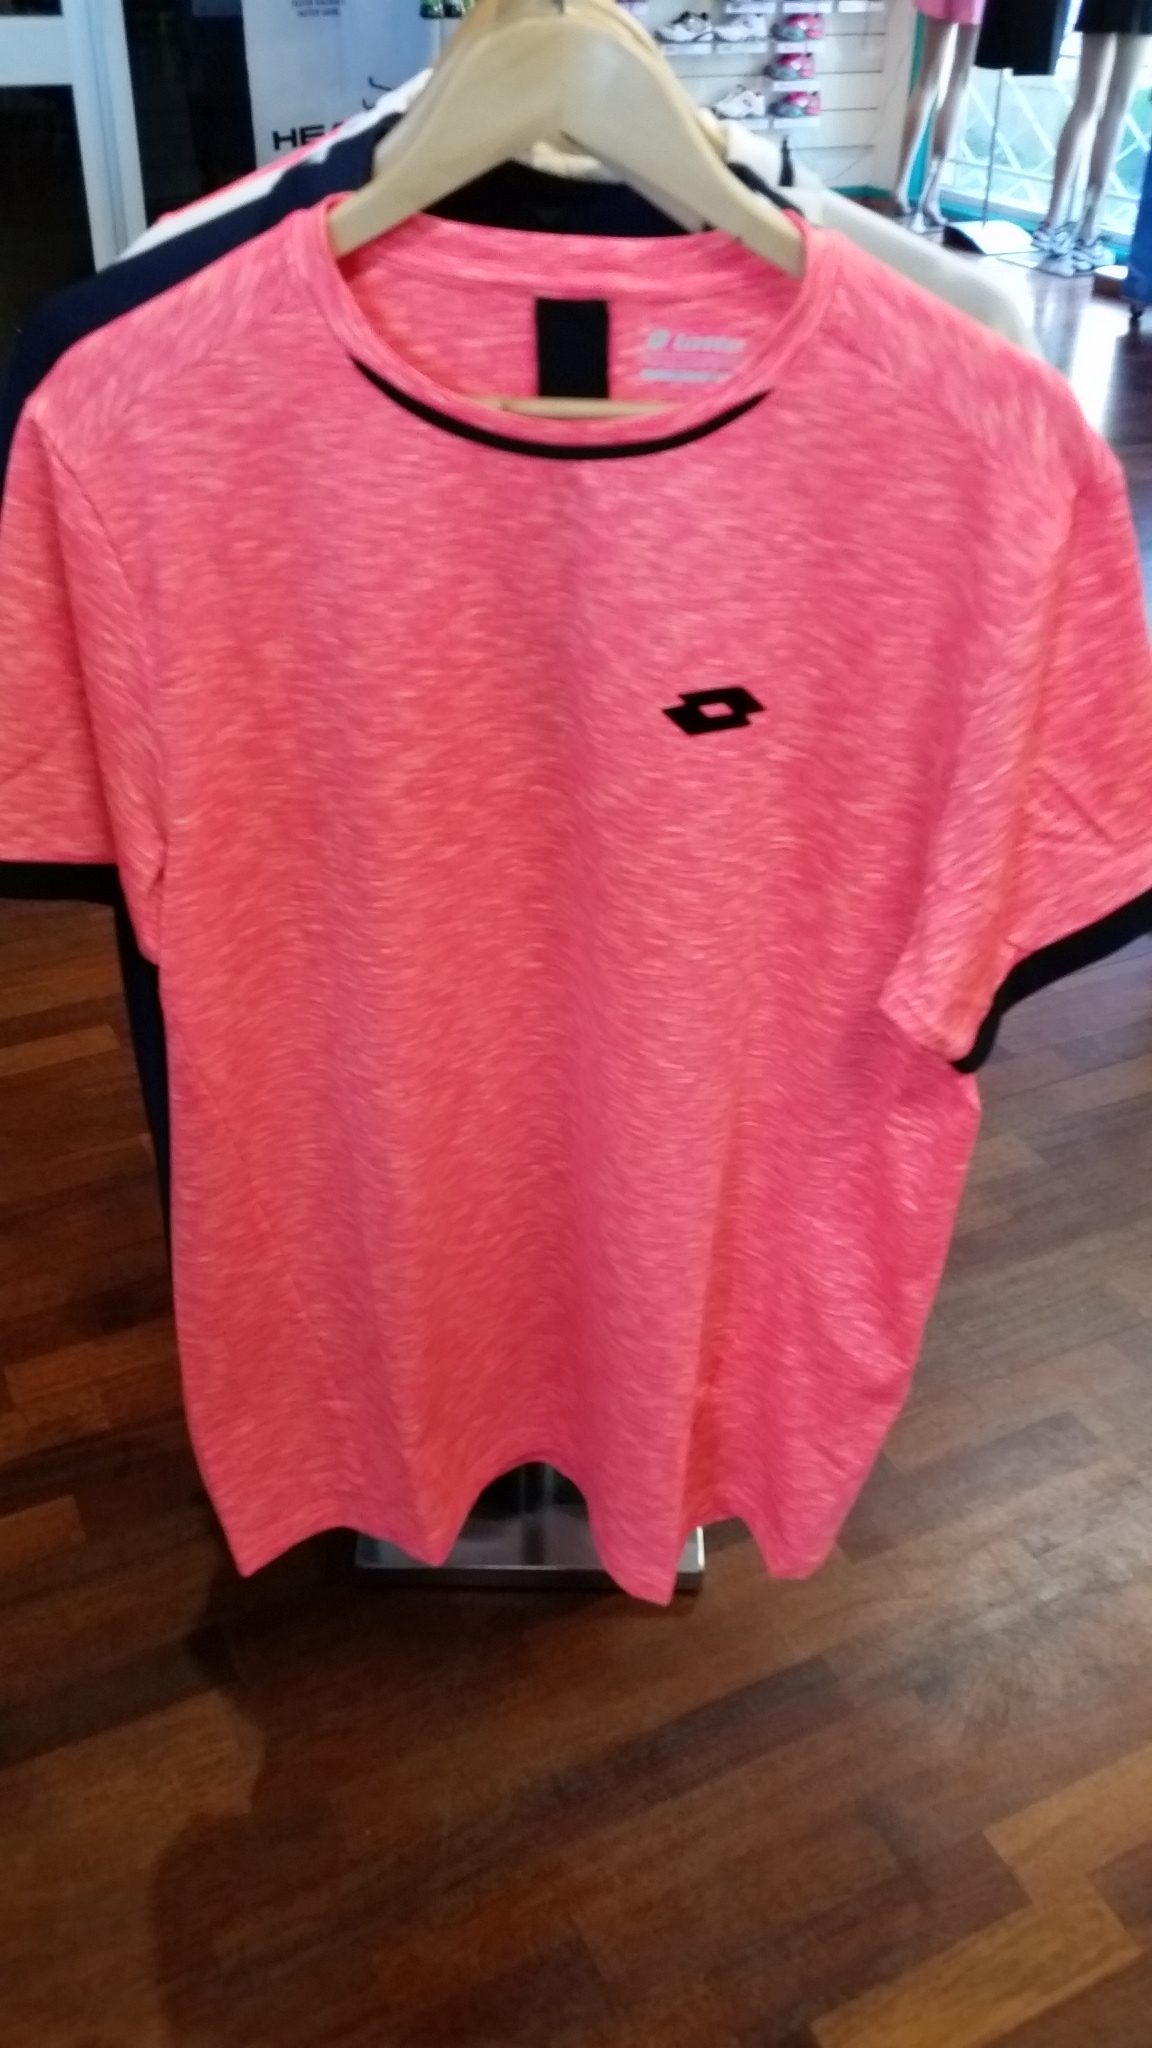 Lotto Space Tee Rose - Tennis Racquet | Tennis shoes | Tennis clothing